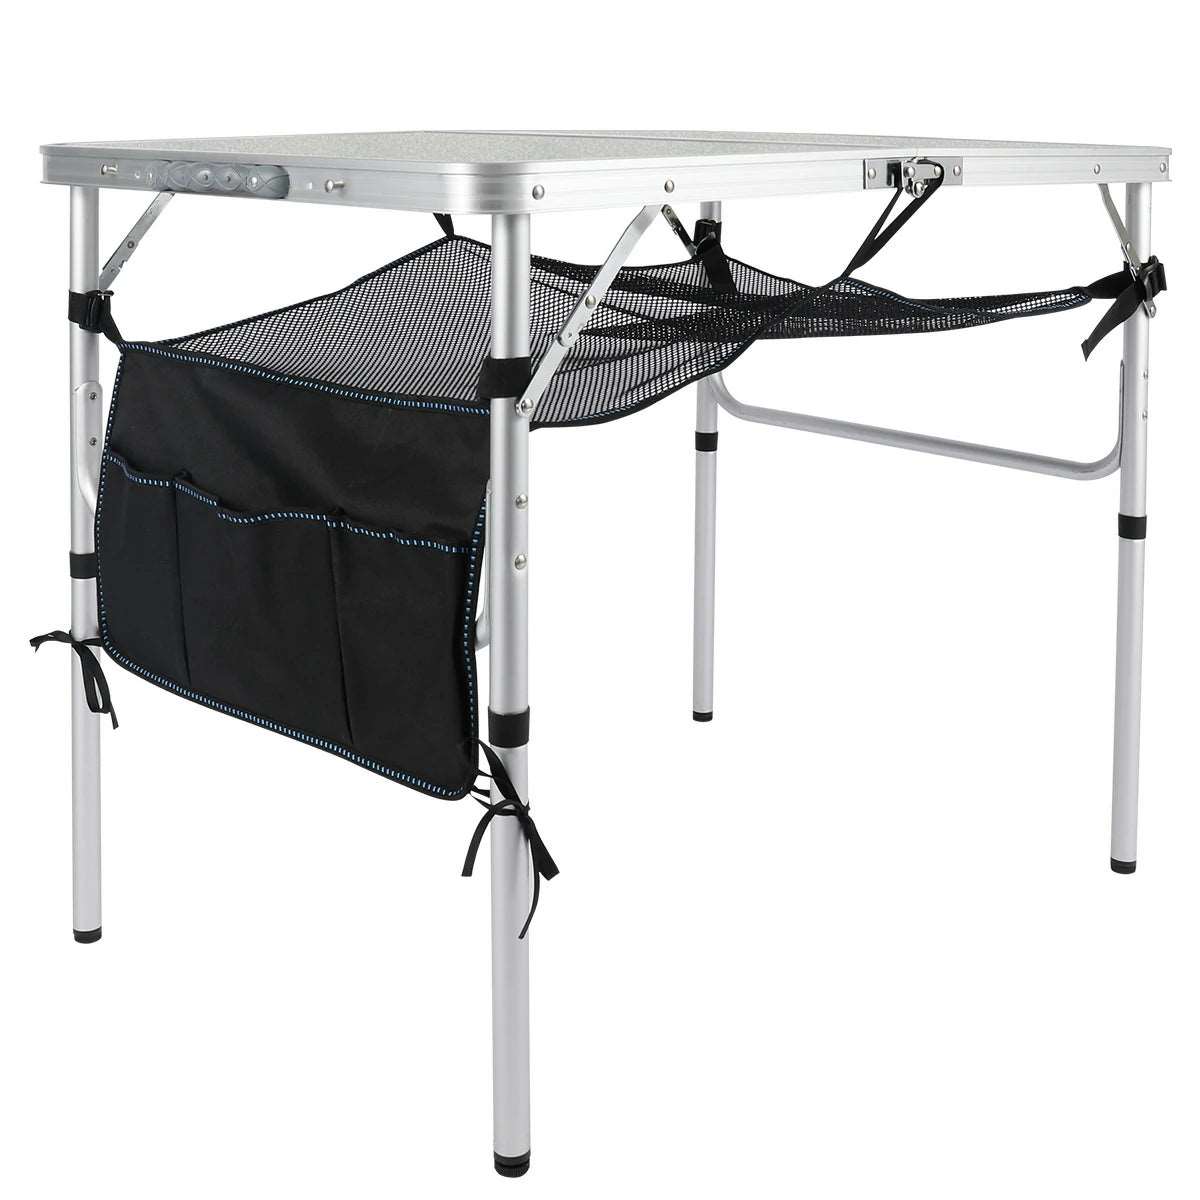 REDCAMP Folding Grill Table for Camping with Mesh Desktop Silver / 48x24”